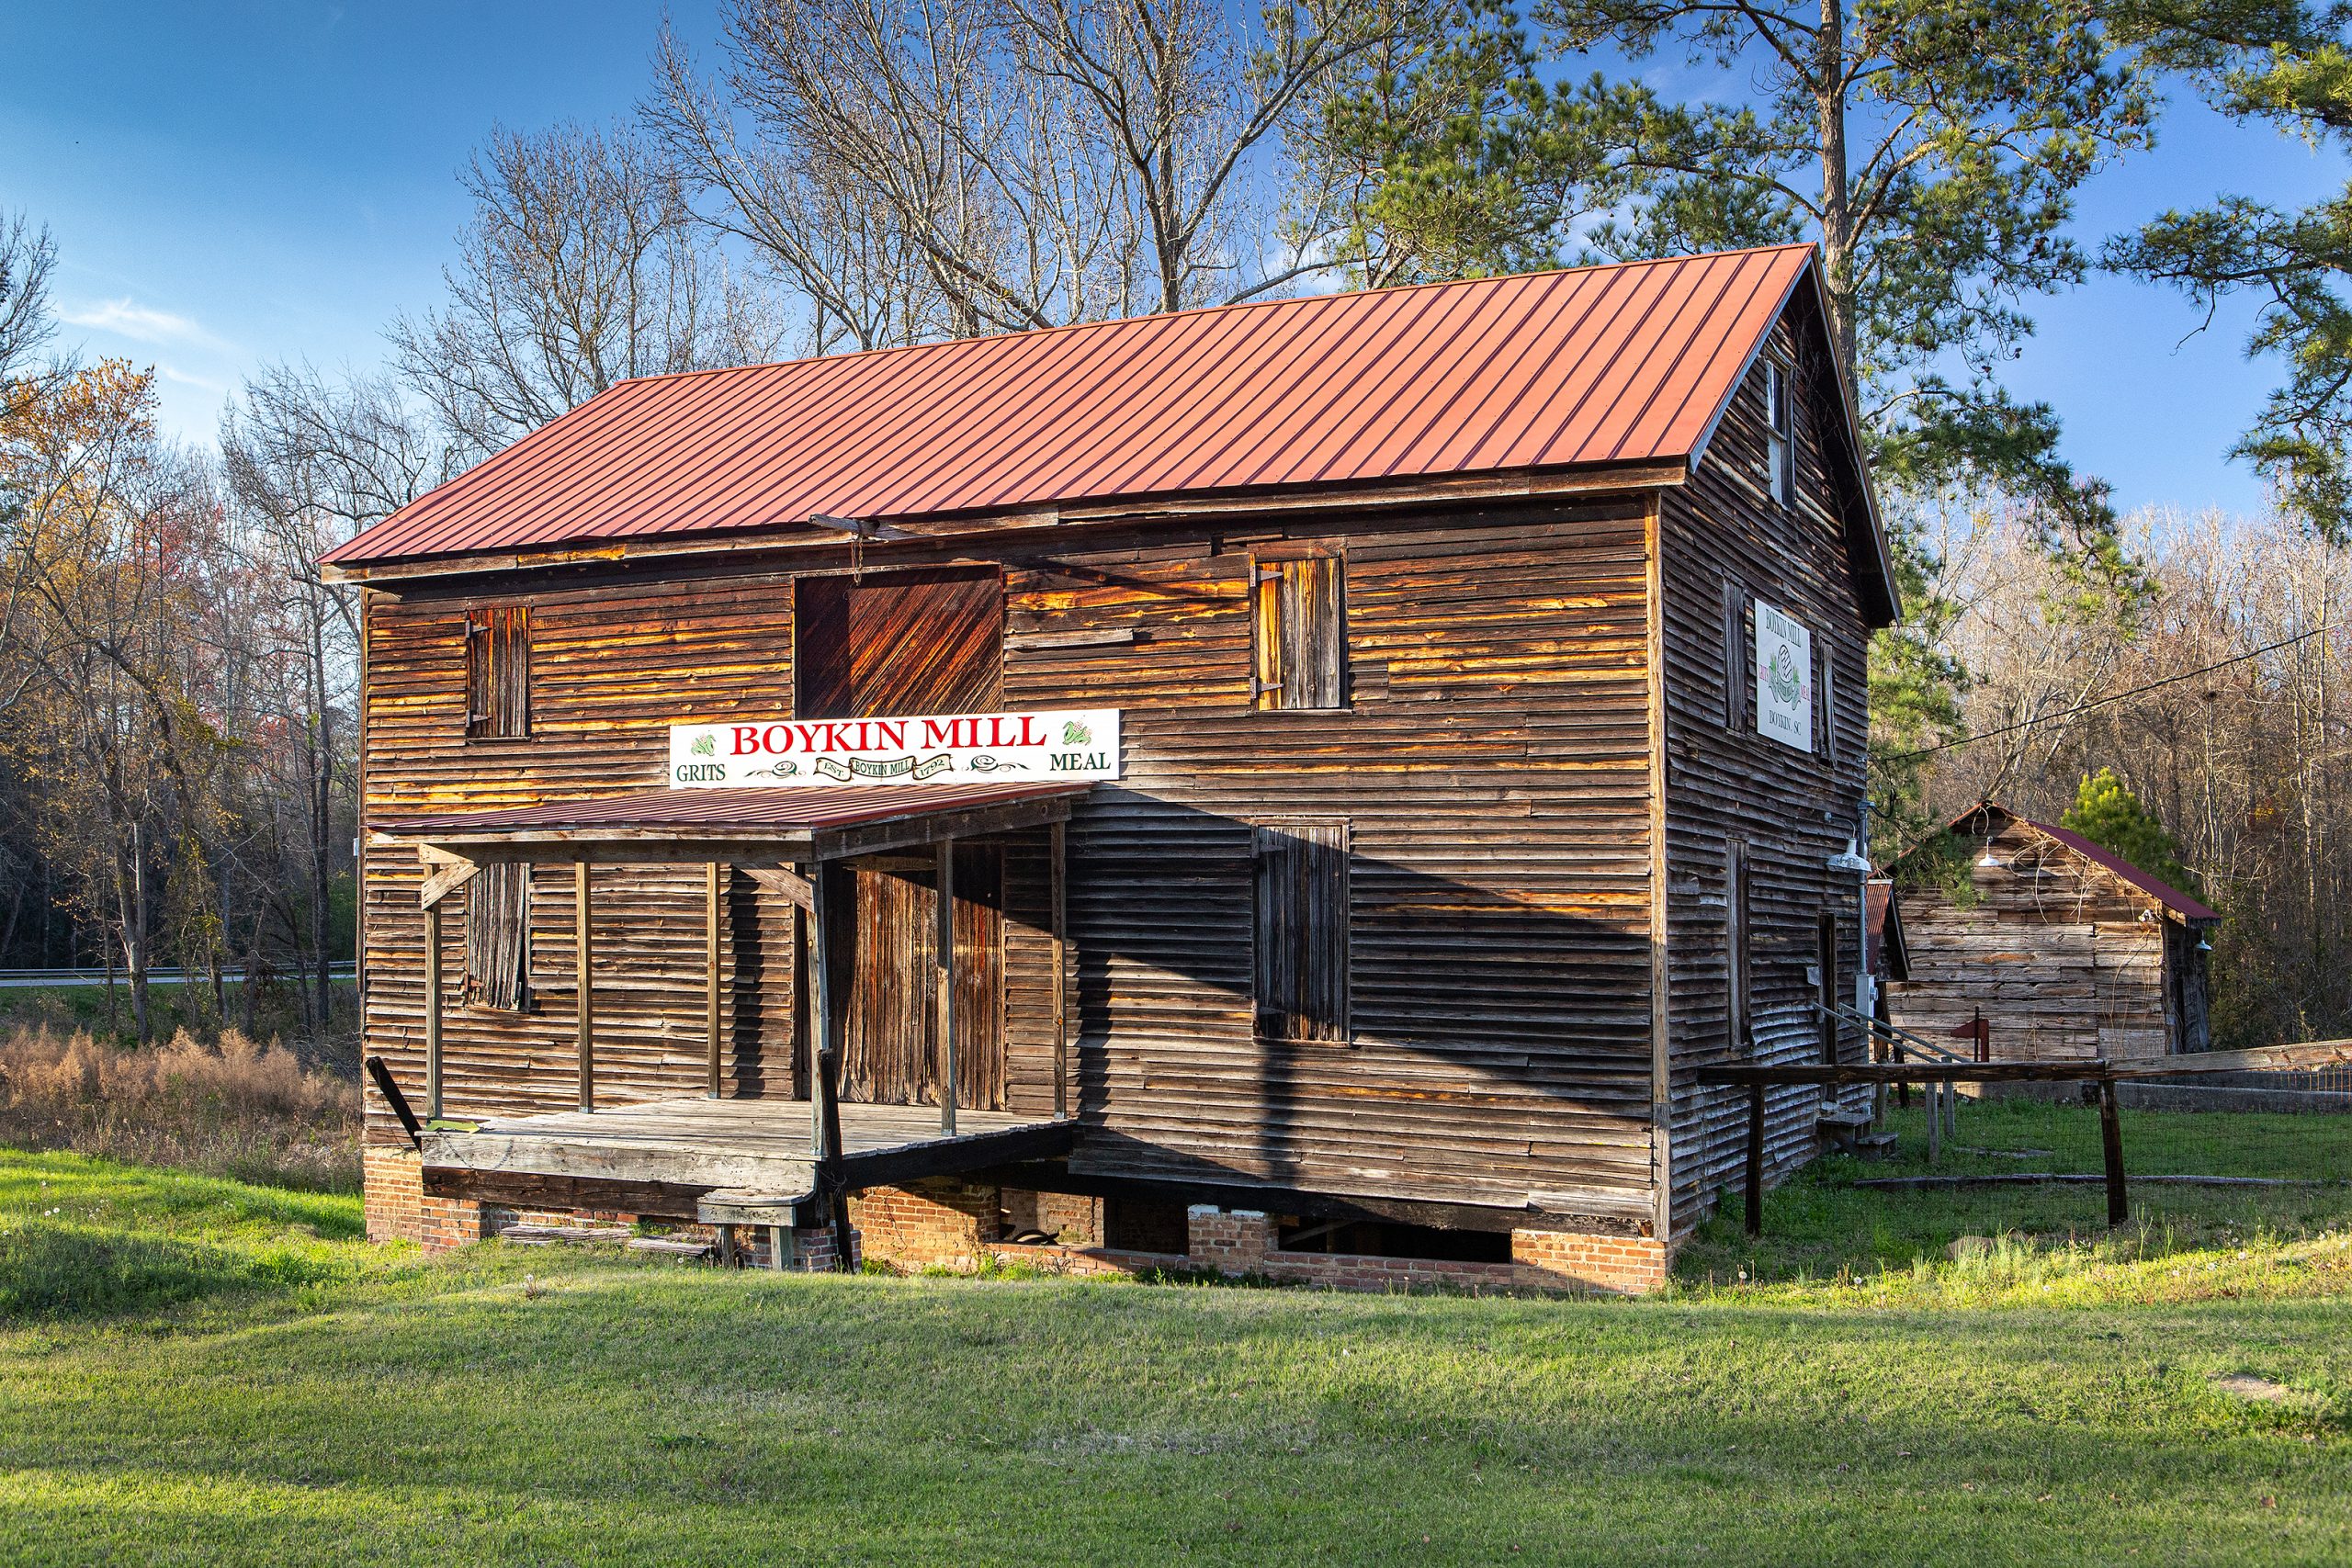 Boykin Mill was the center of the community of Boykin in the late 1700s. Crafted for milling grits, corn, and lumber, the housing for the mill was built in 1905.